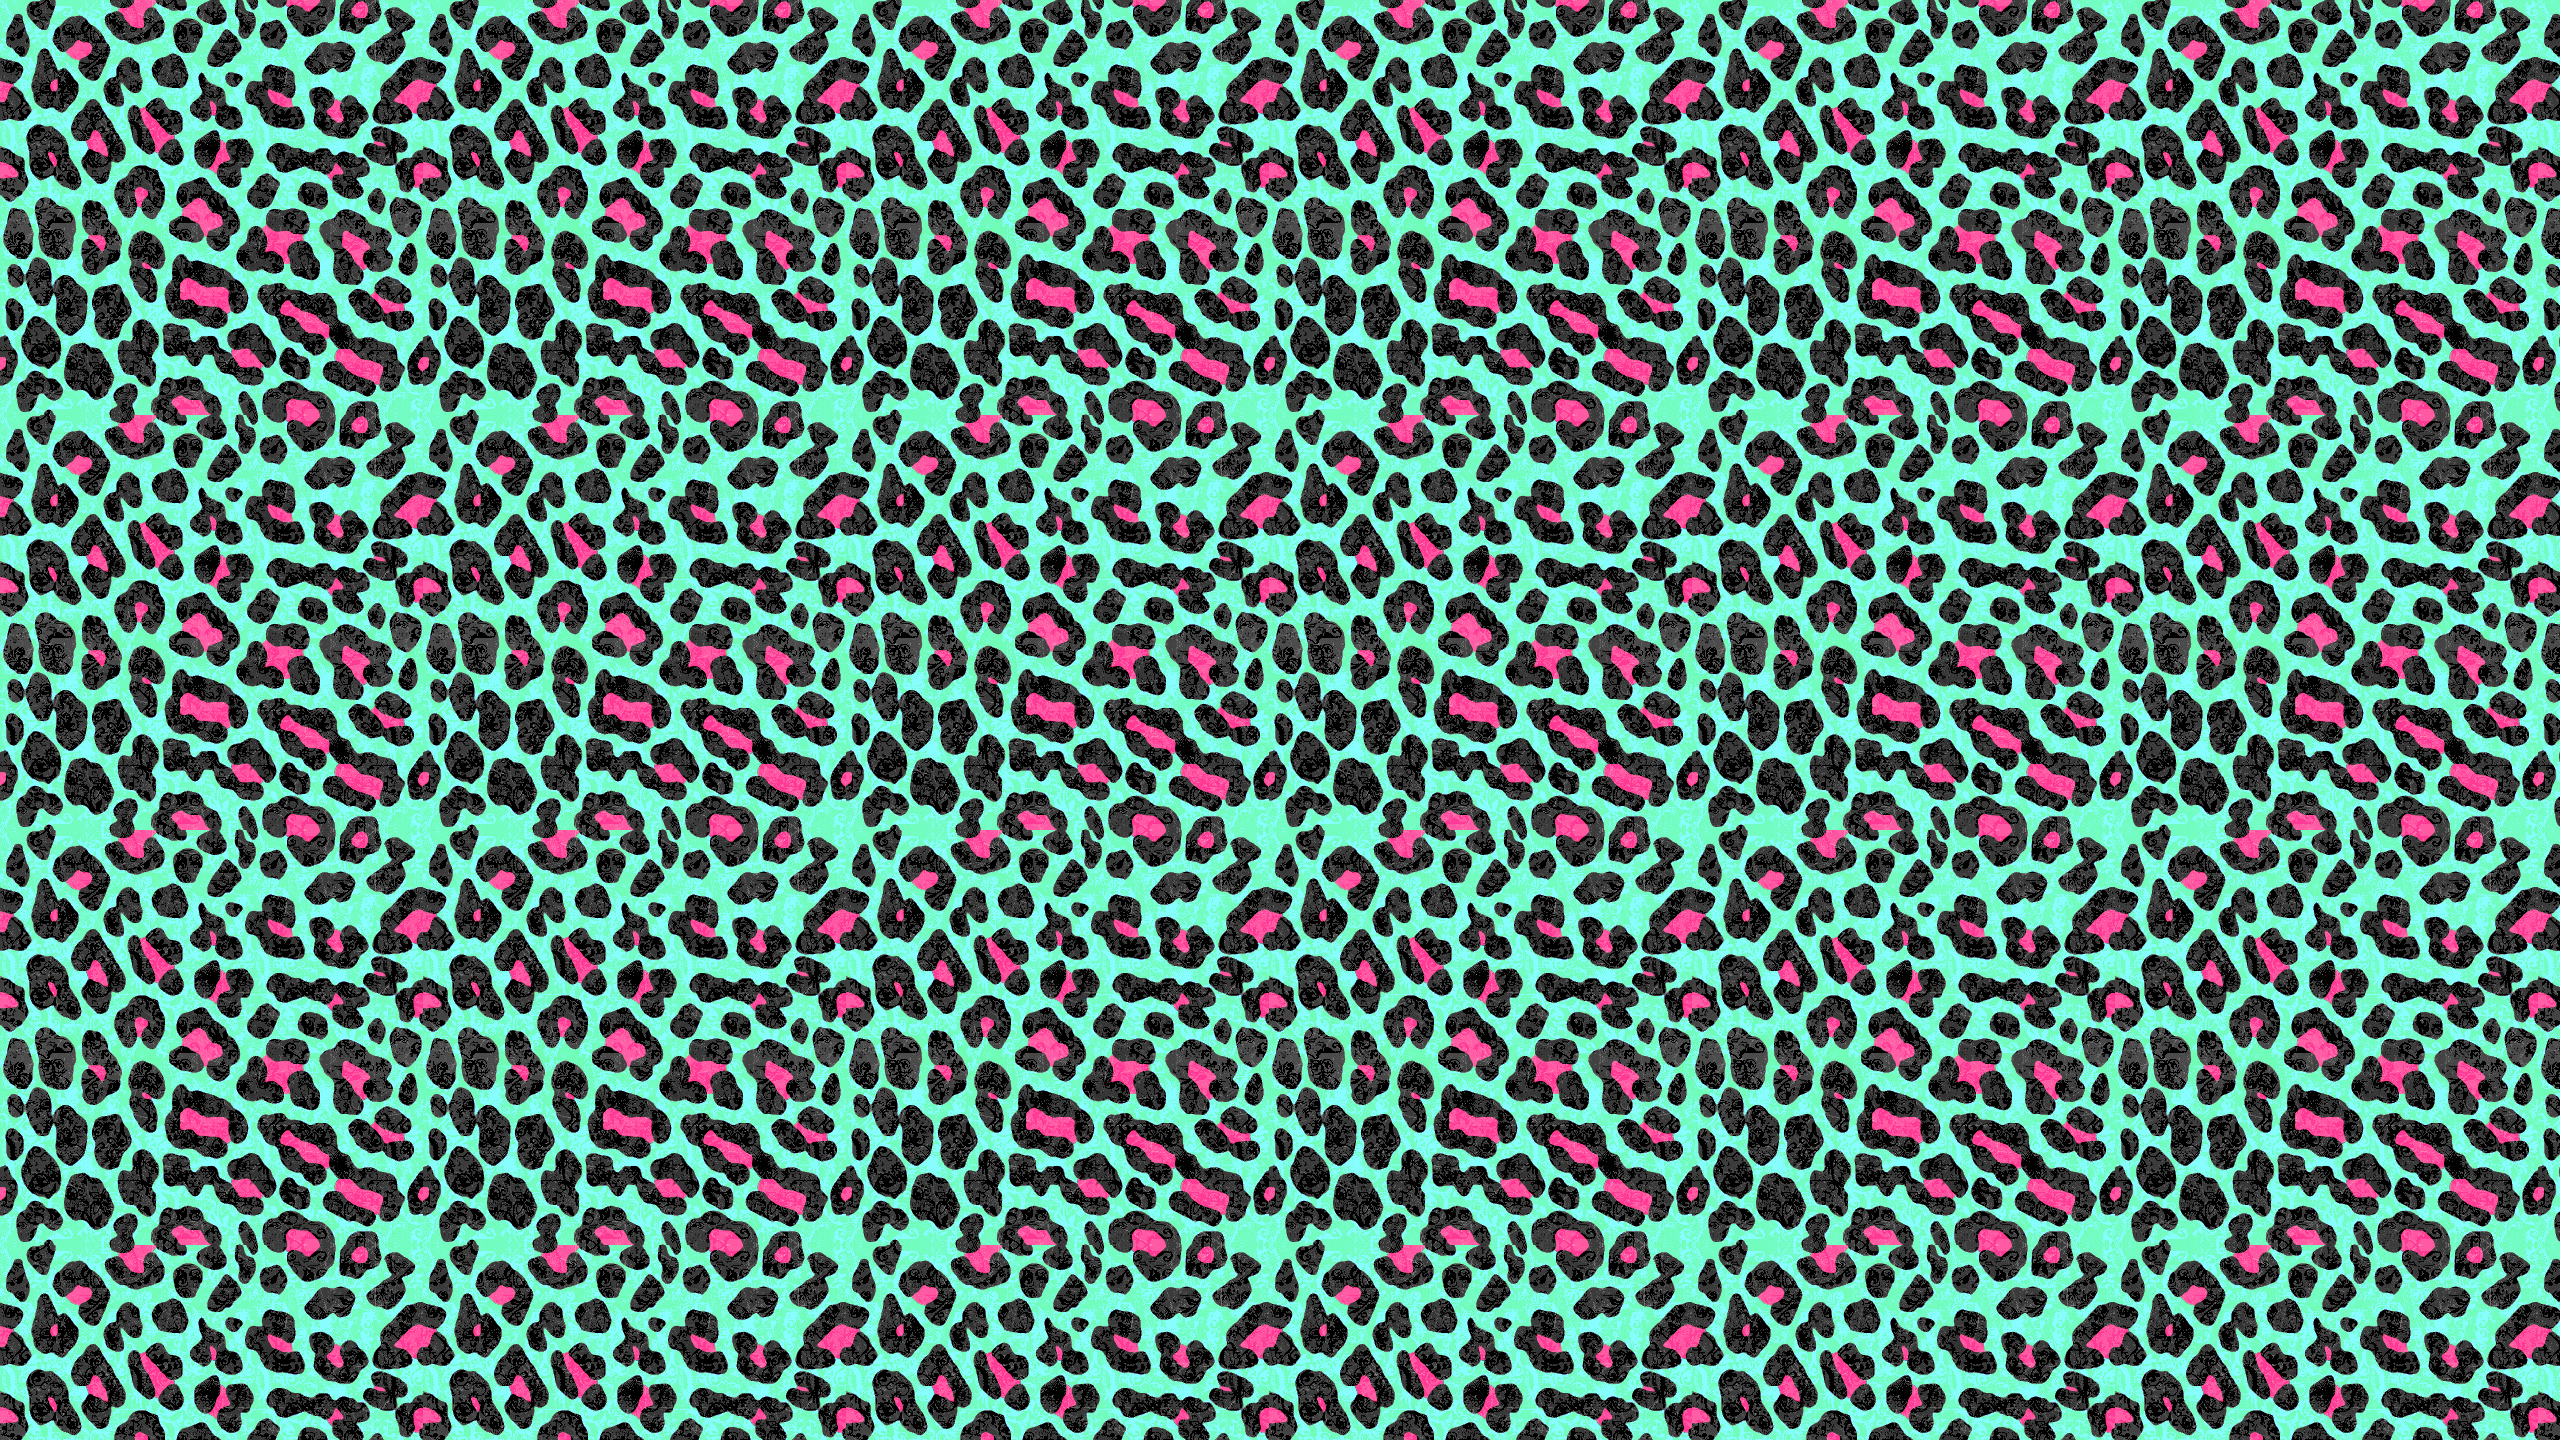 Pictures of Cheetah Print Wallpaper 55 pictures